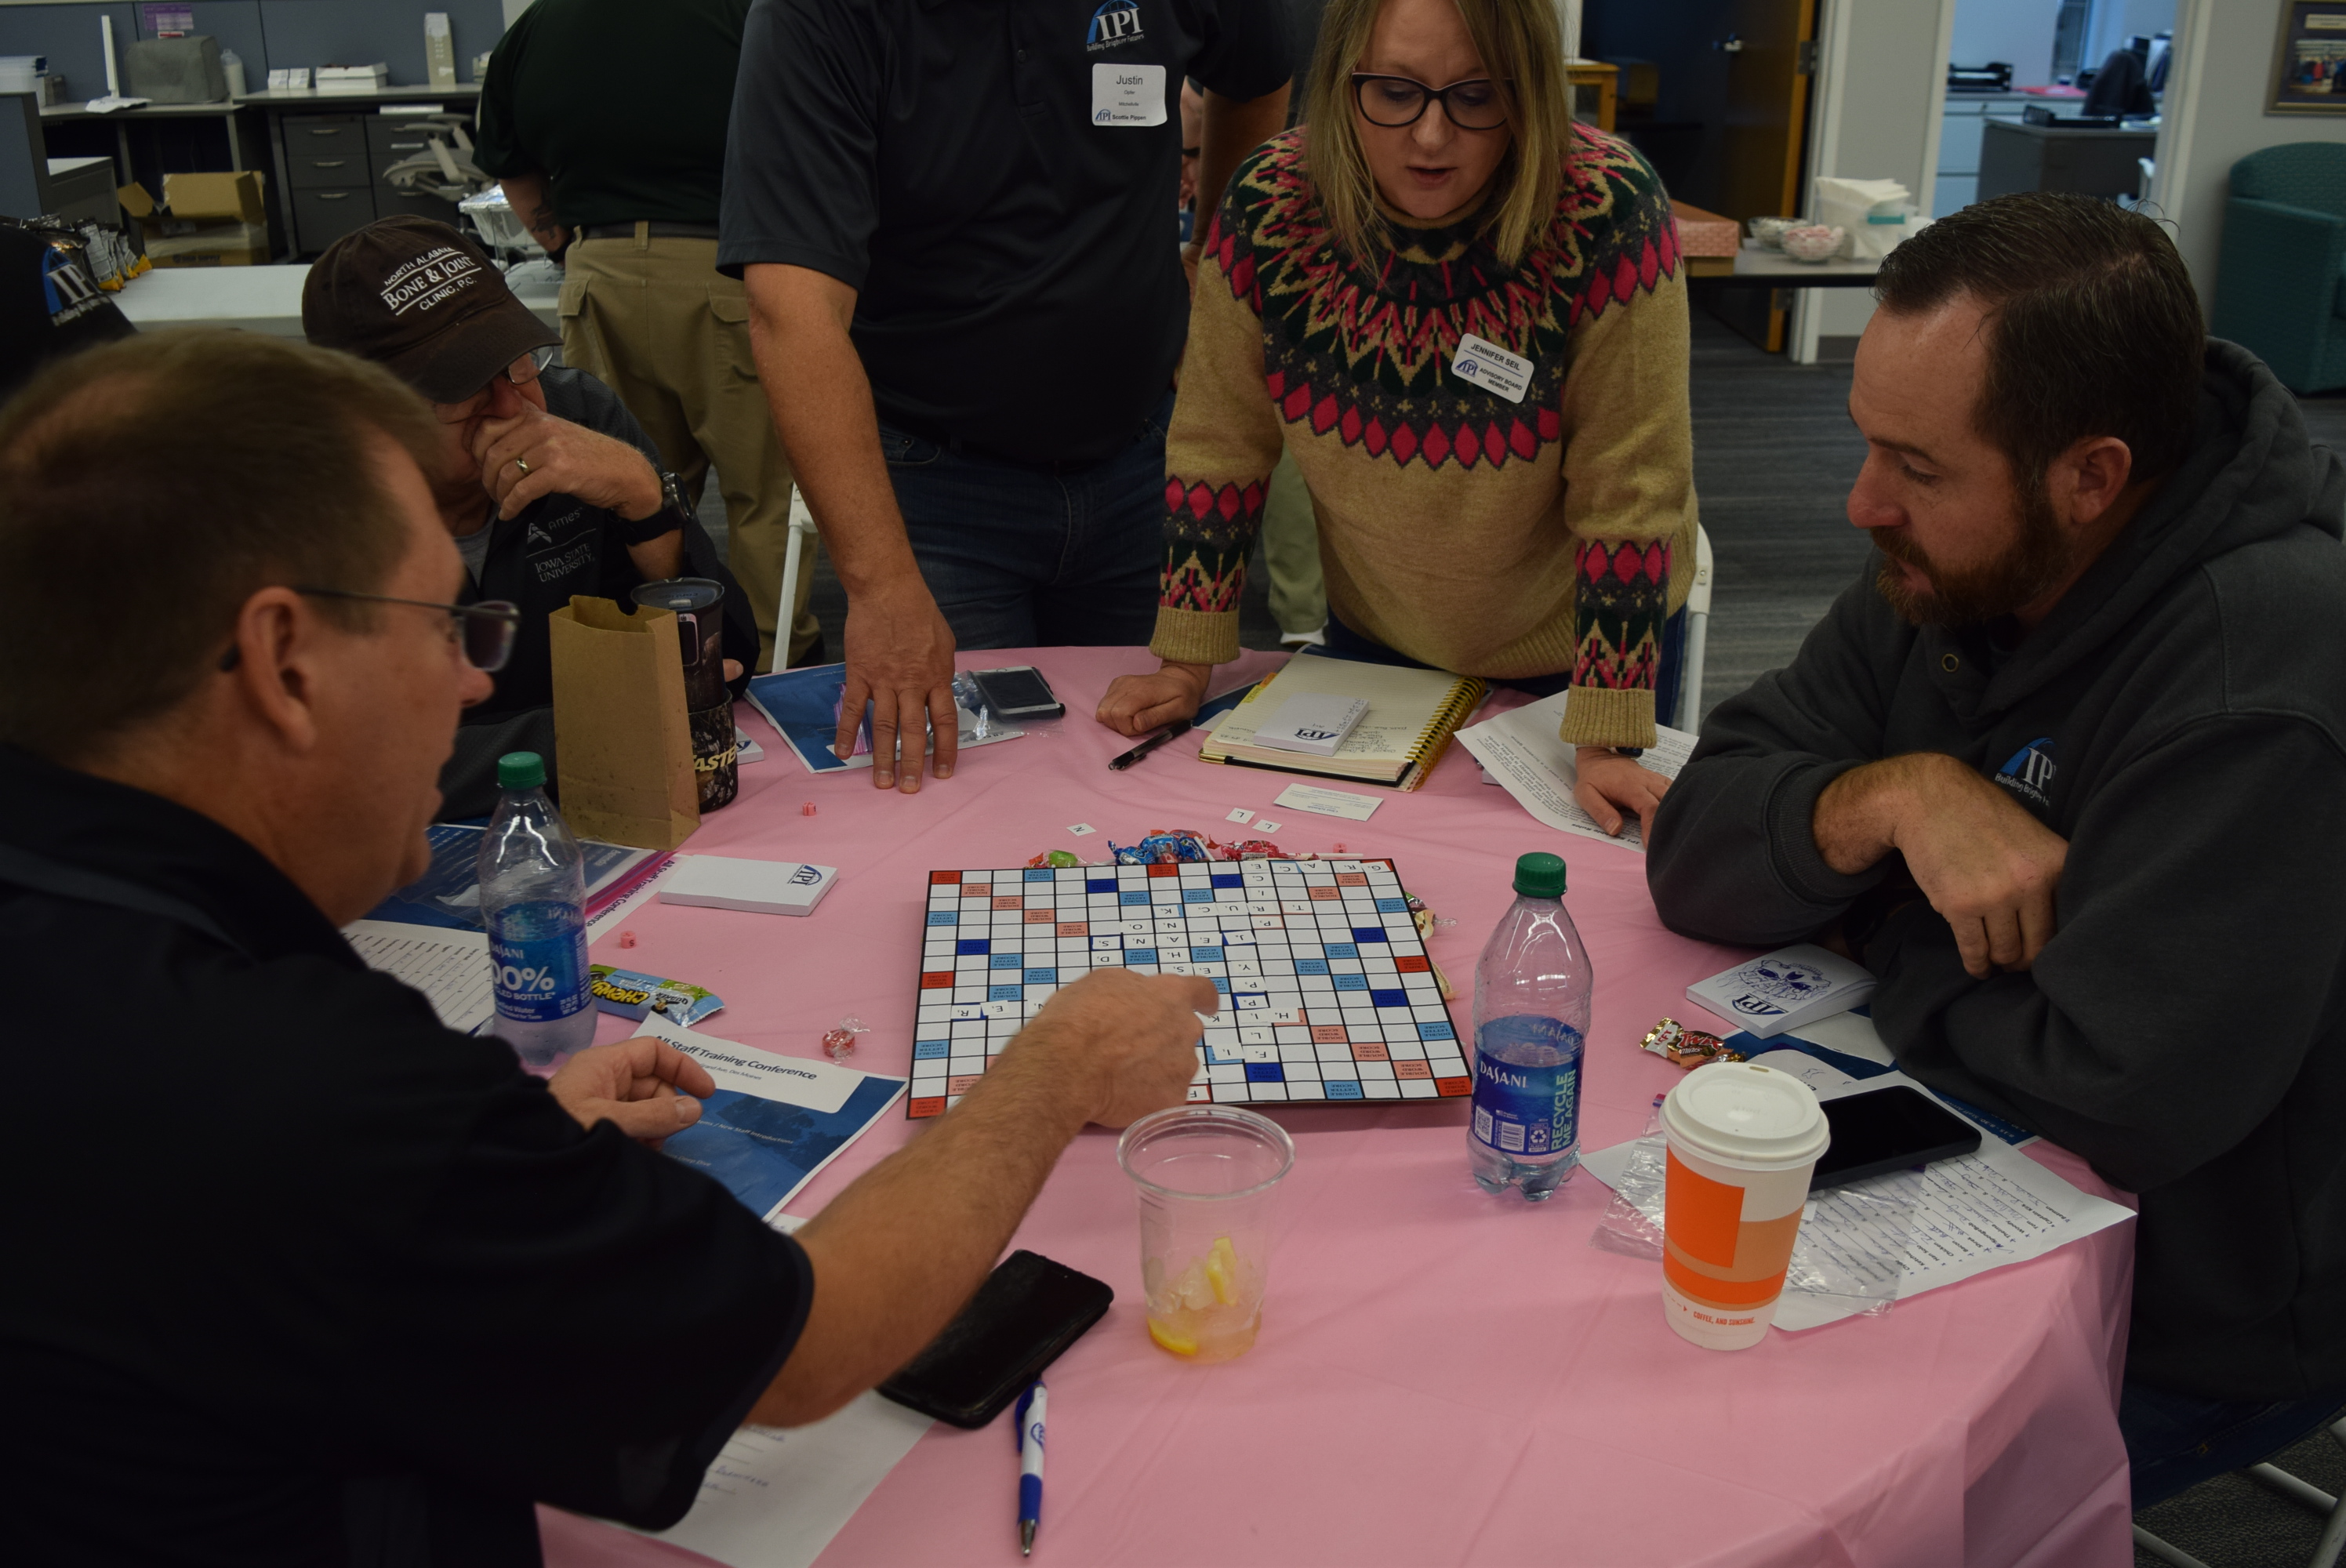 Image of IPI staff playing Scrabble game